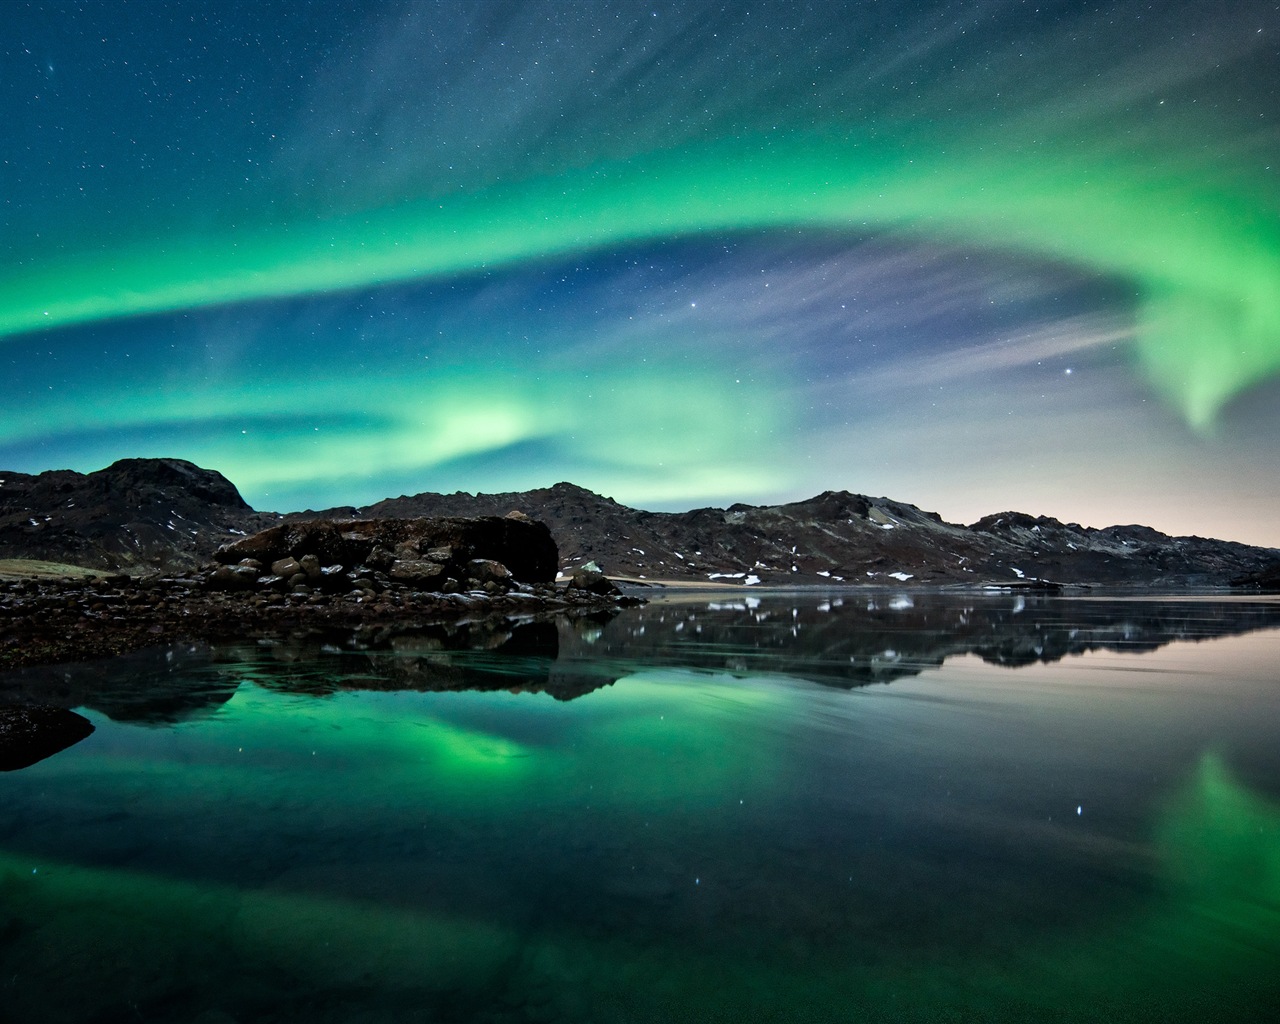 Natural wonders of the Northern Lights HD Wallpaper (1) #1 - 1280x1024